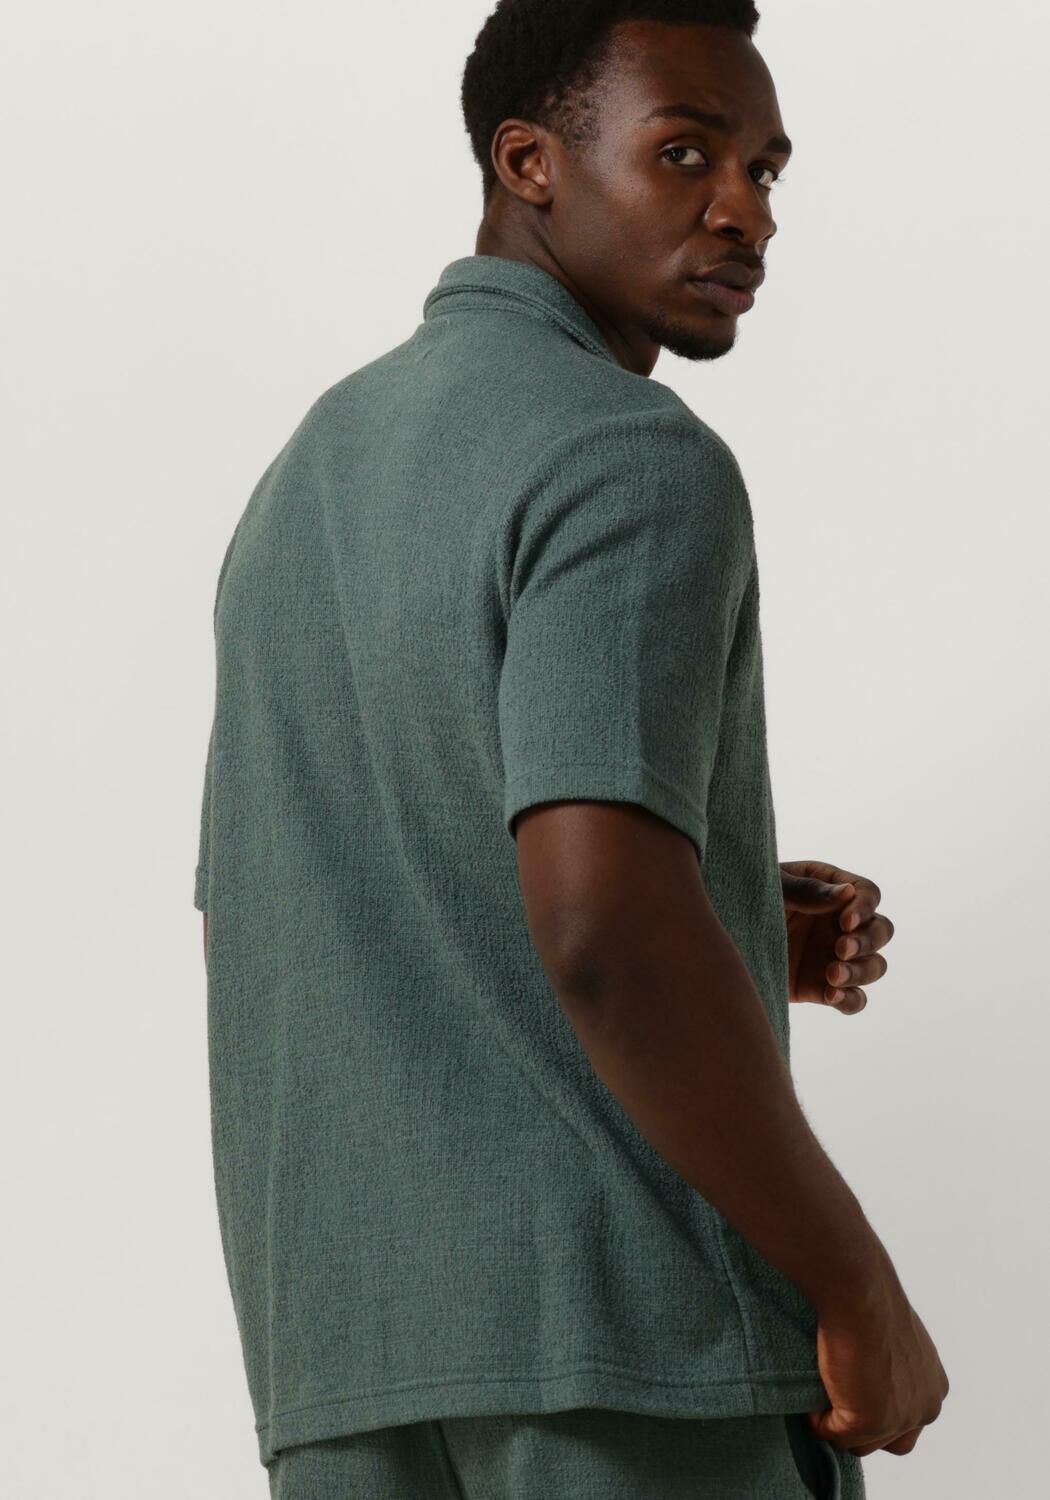 PURE PATH Heren Overhemden Structured Shortsleeve Shirt With Chest Pocket And Embroidery Groen